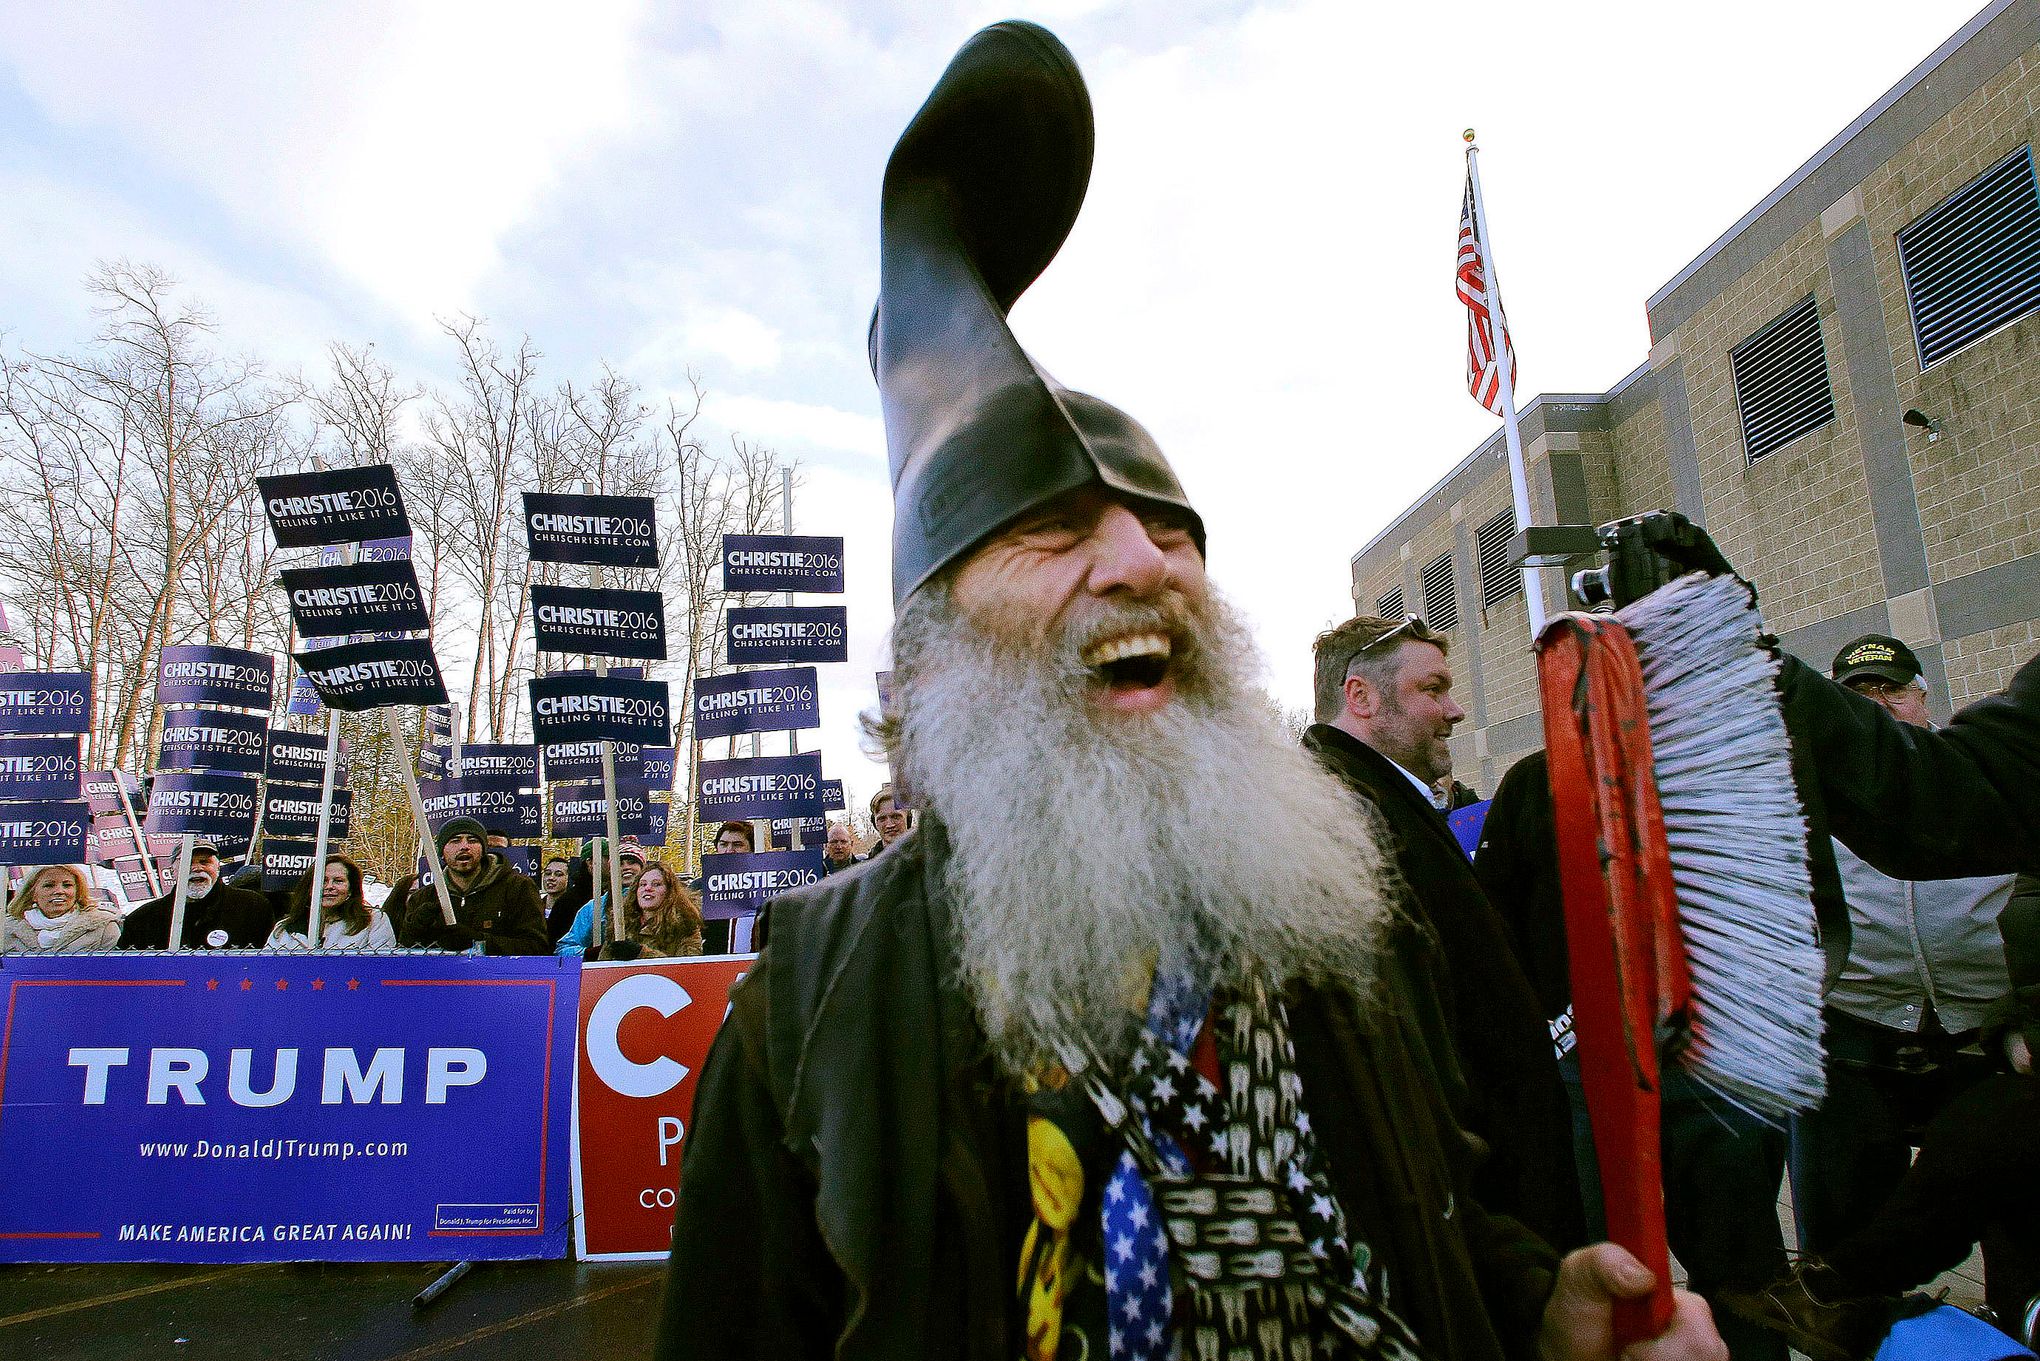 He wears a boot on his hat and promises free ponies: Satirist Vermin Supreme wants vote | The Seattle Times